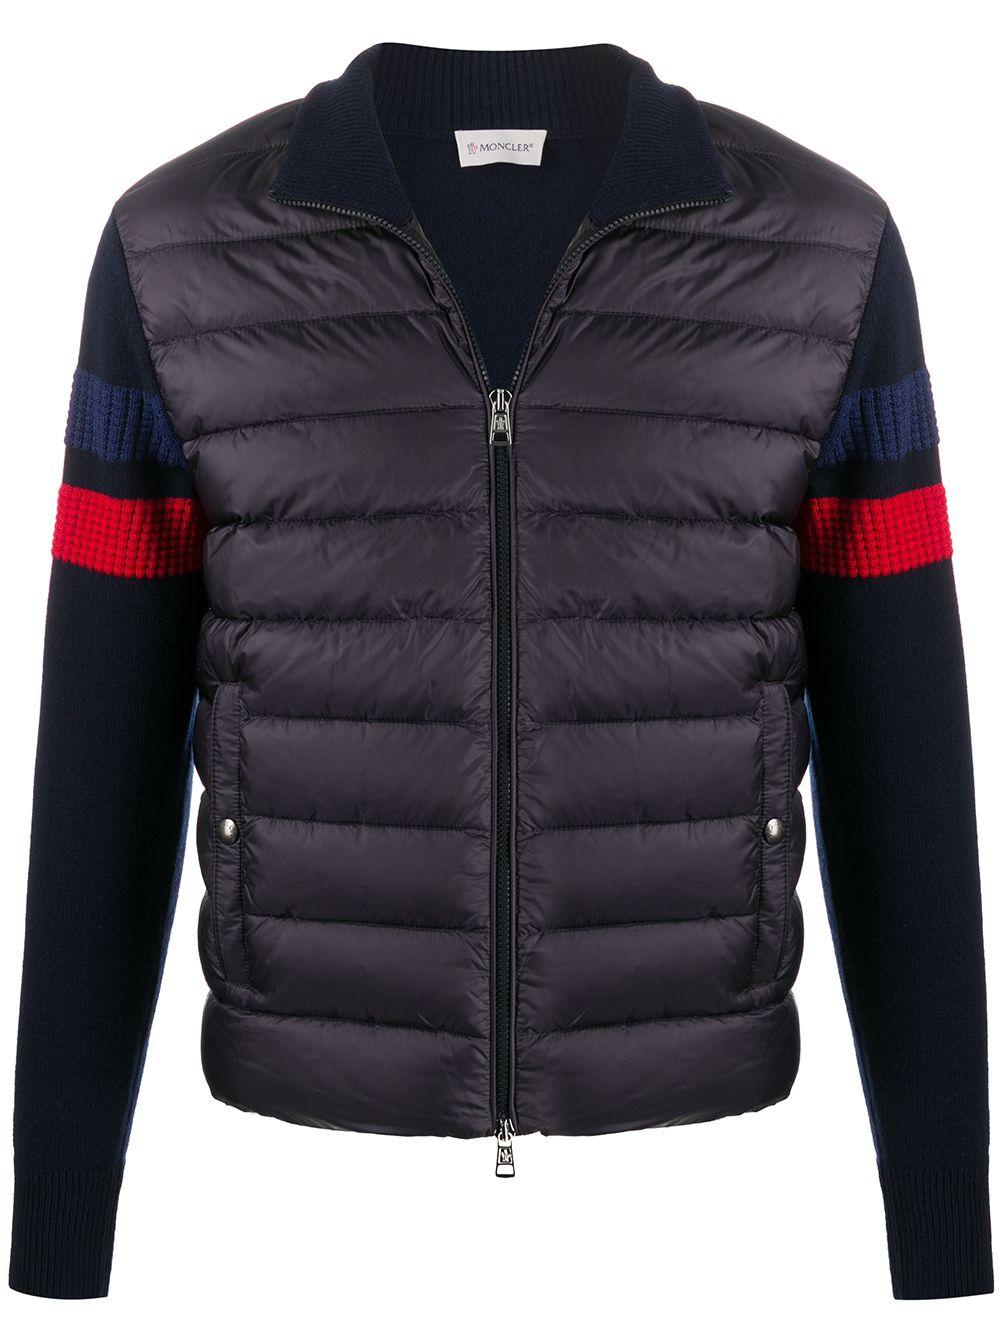 Moncler Wool Padded Cardigan in Blue for Men - Lyst